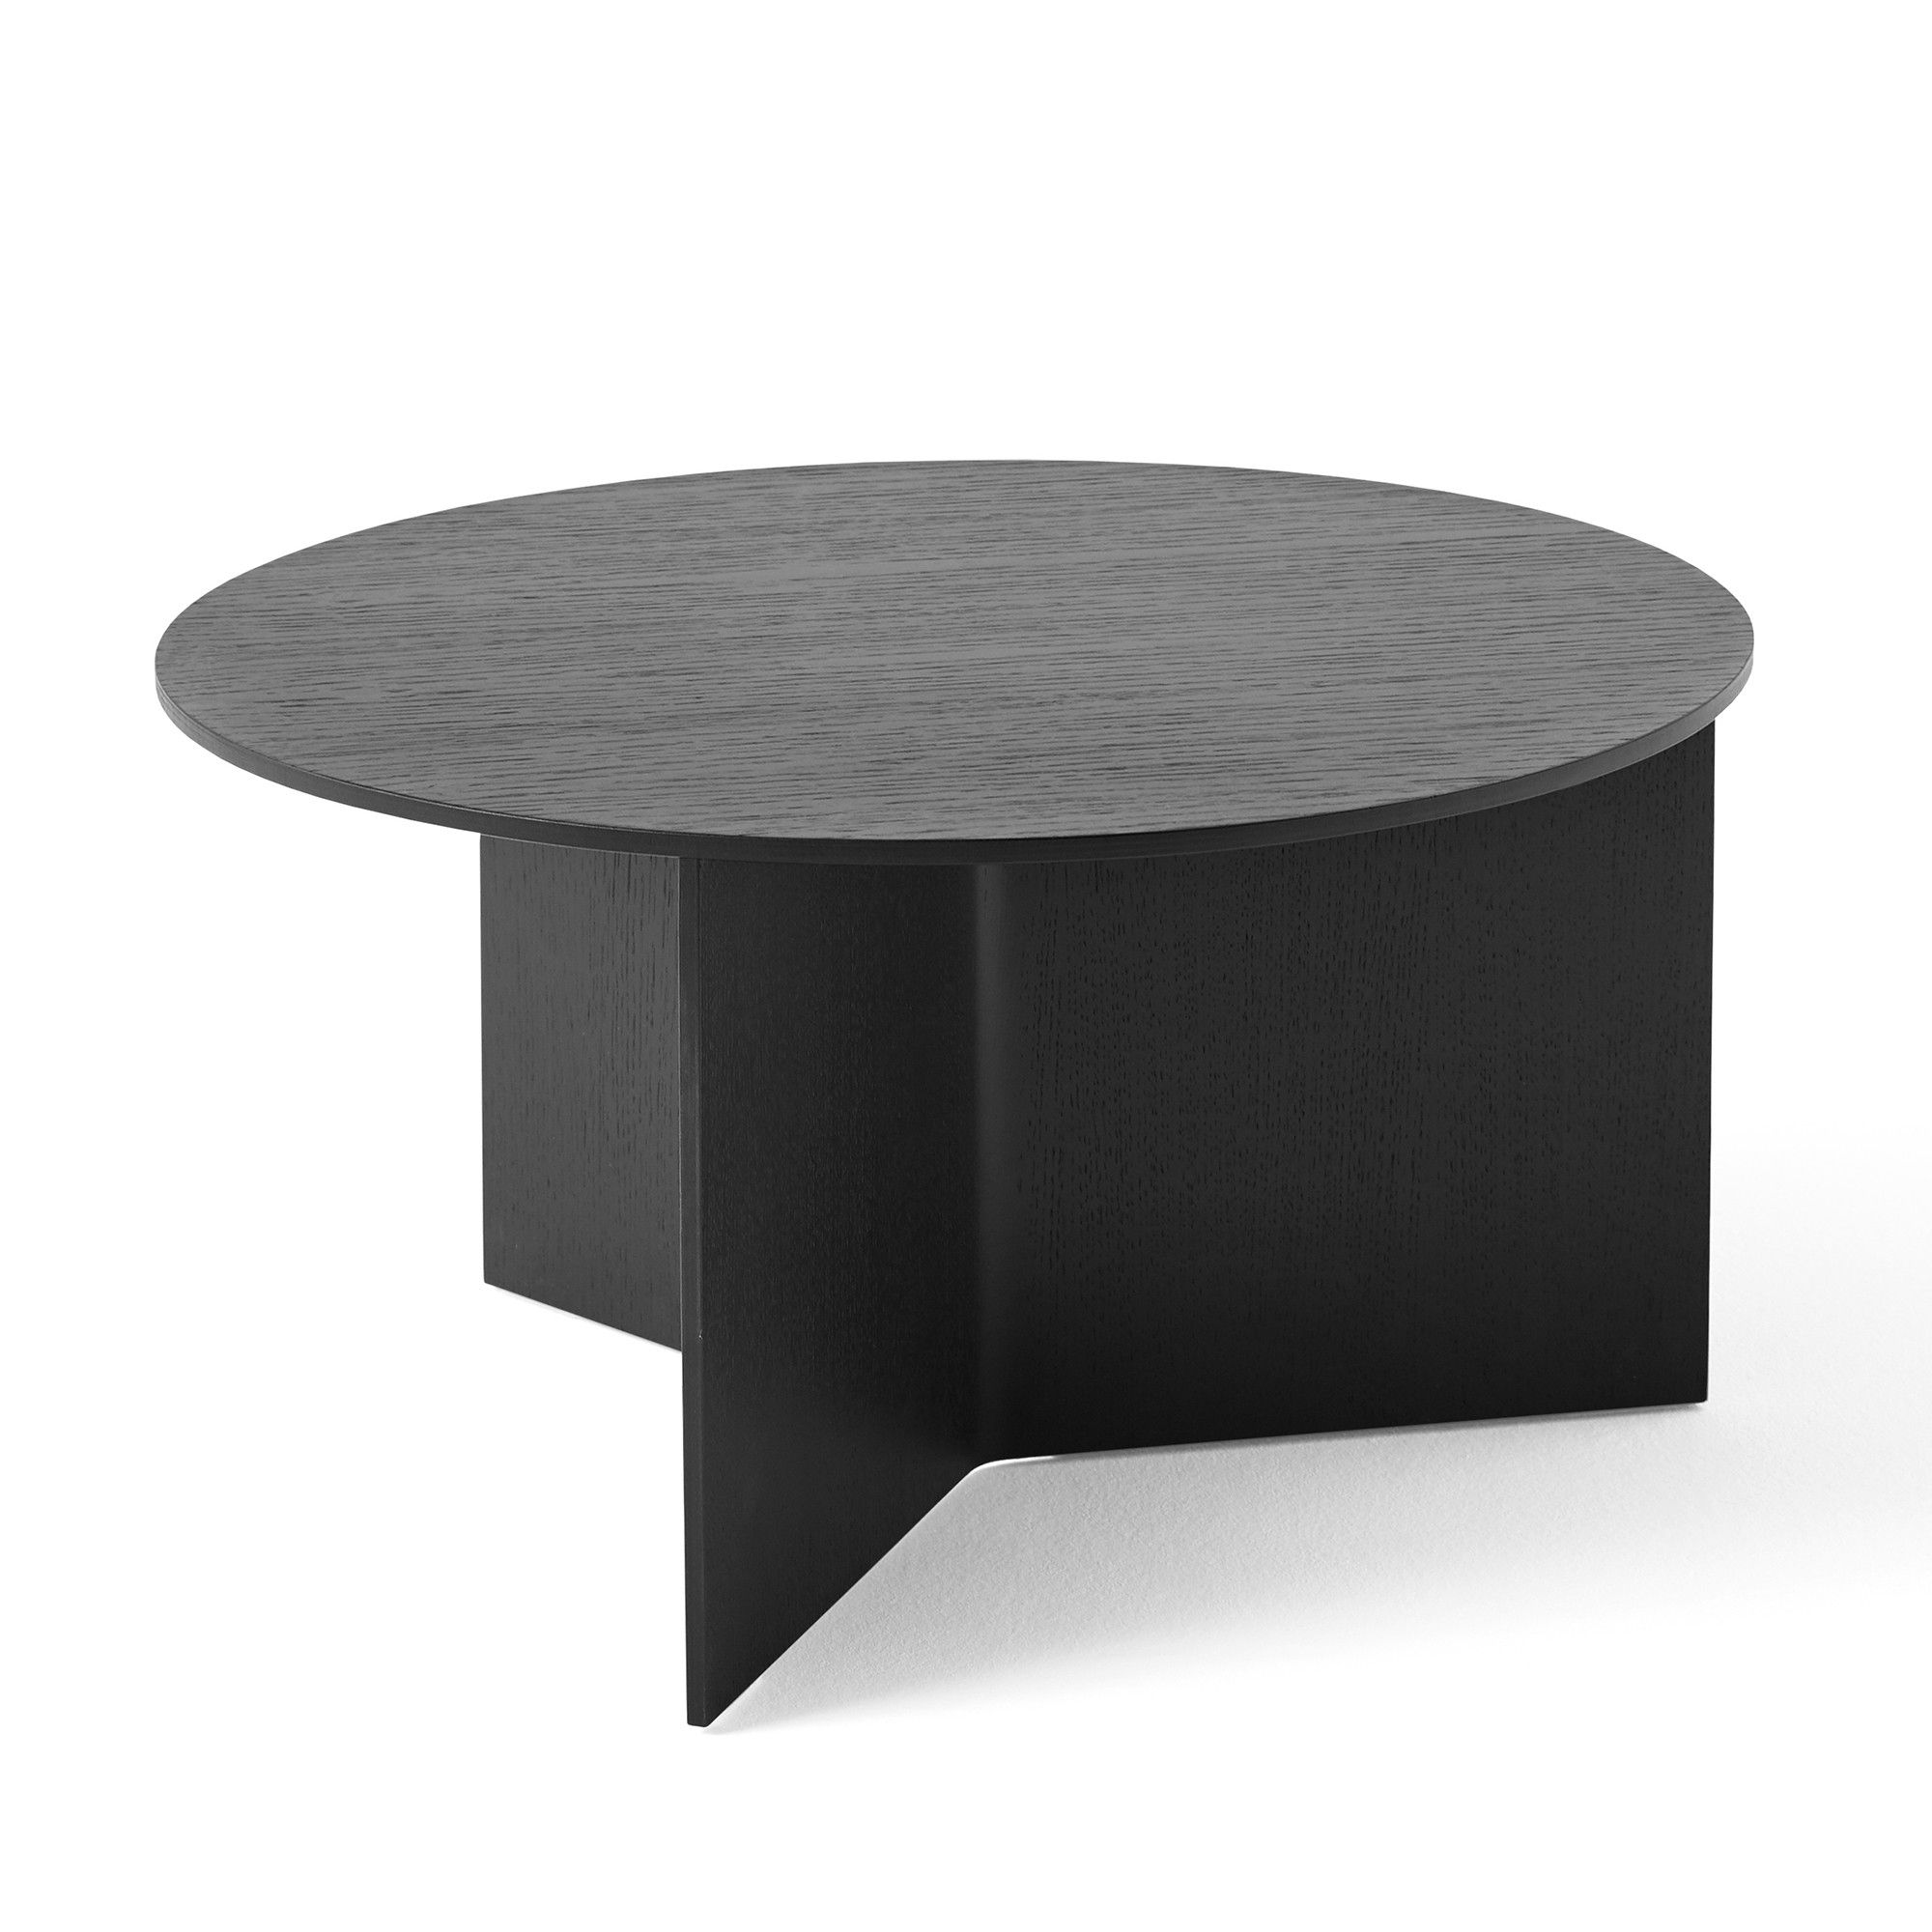 Full Black Round Coffee Tables For Trendy Slit Round Table Xl – Black Oak – Hay (View 4 of 10)